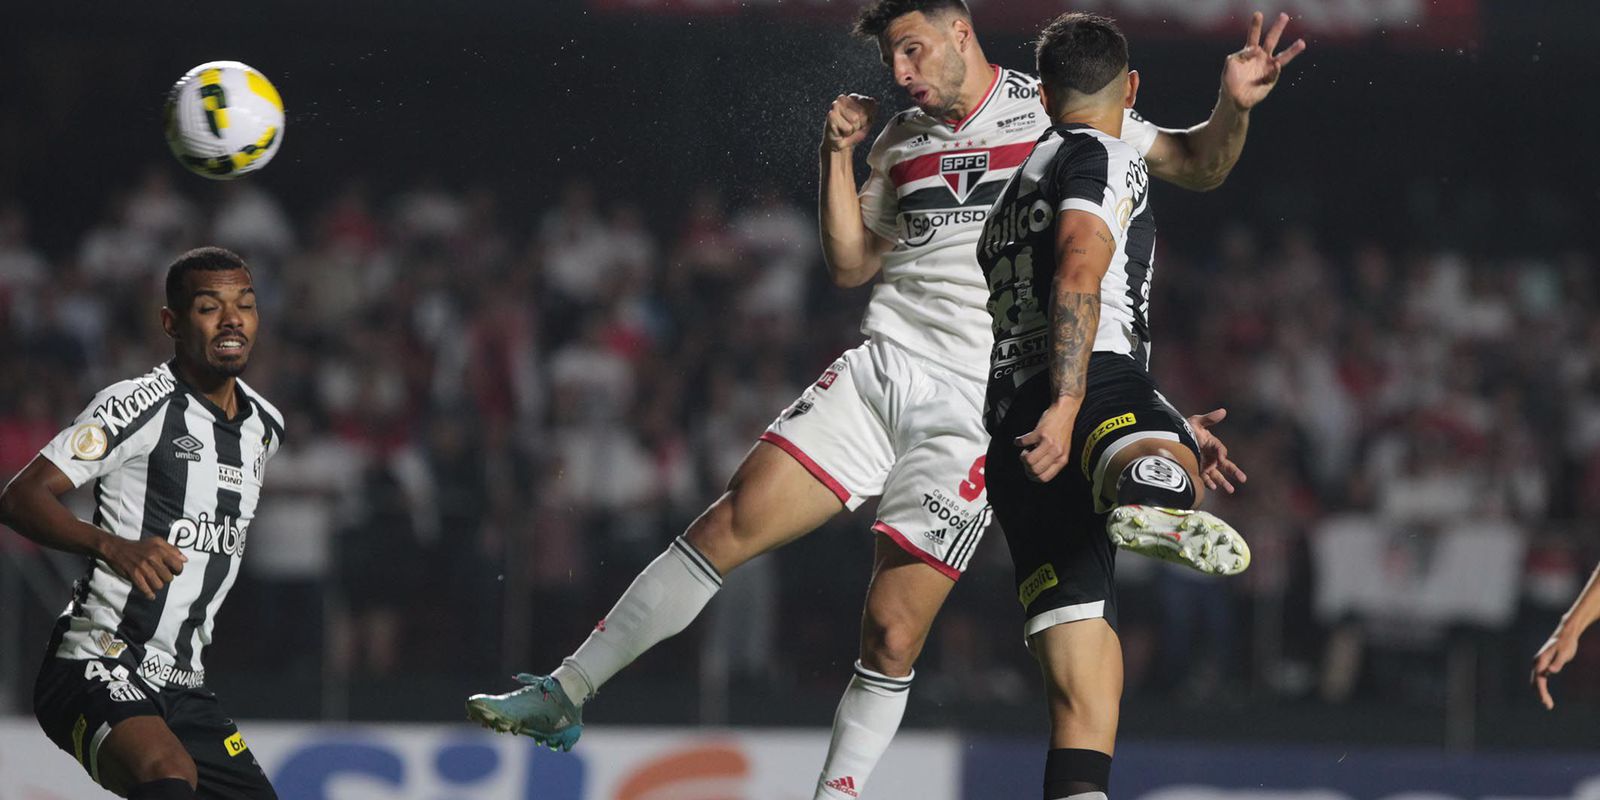 São Paulo defeats Santos in classic with penalty goal at the end